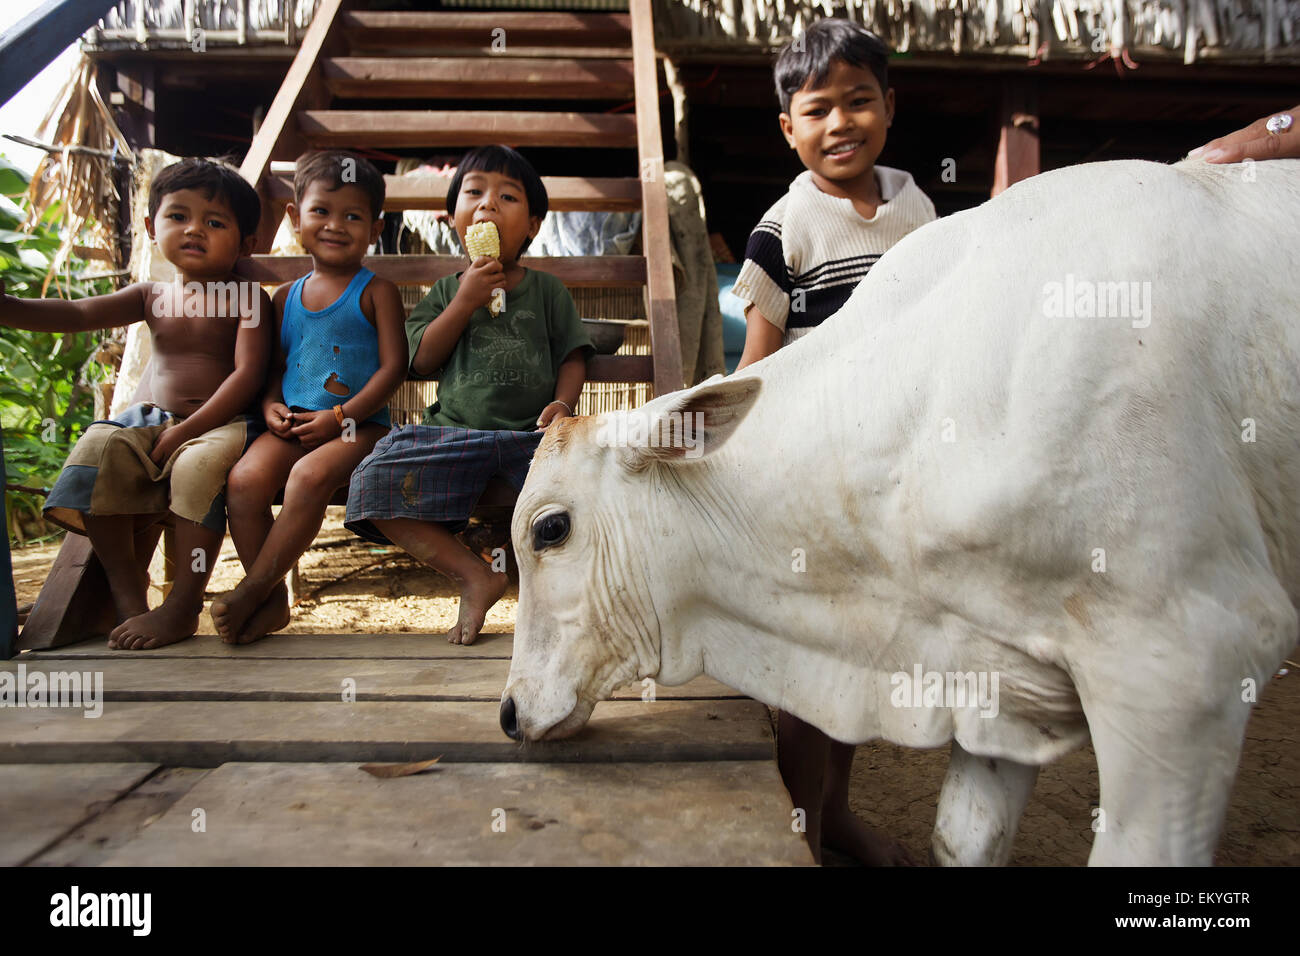 Young boys sit together watching a cow walk by; Kouk Duong Village, Battambang Province, Cambodia Stock Photo